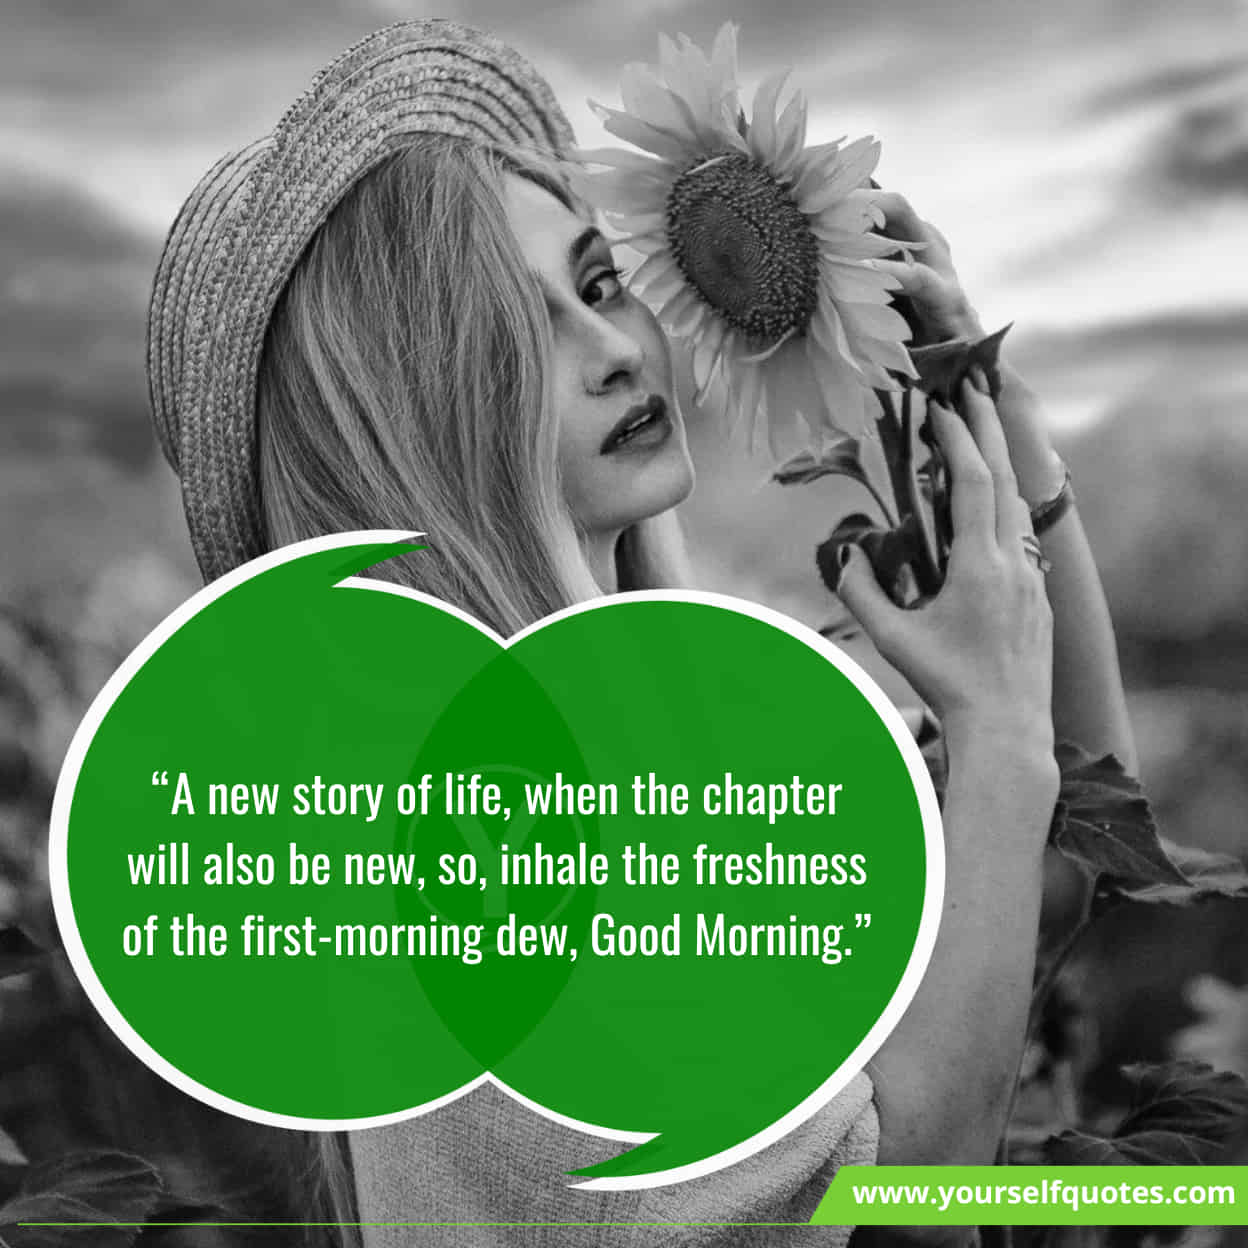 Good Morning Quotes, Wishes, Messages & Status